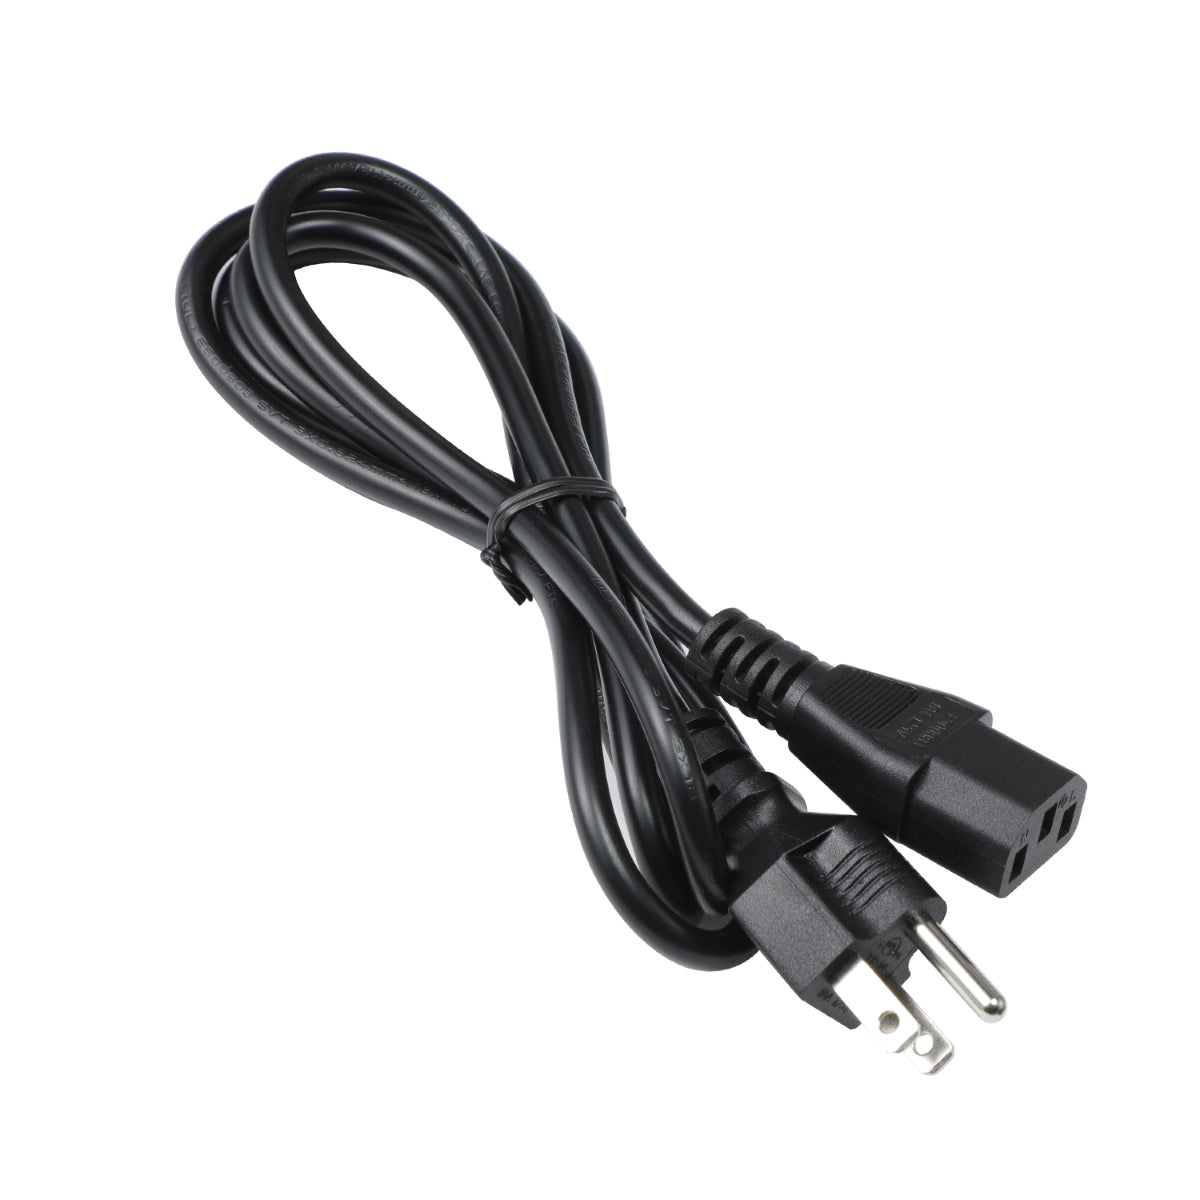 Power Cord for HP W2082a Monitor